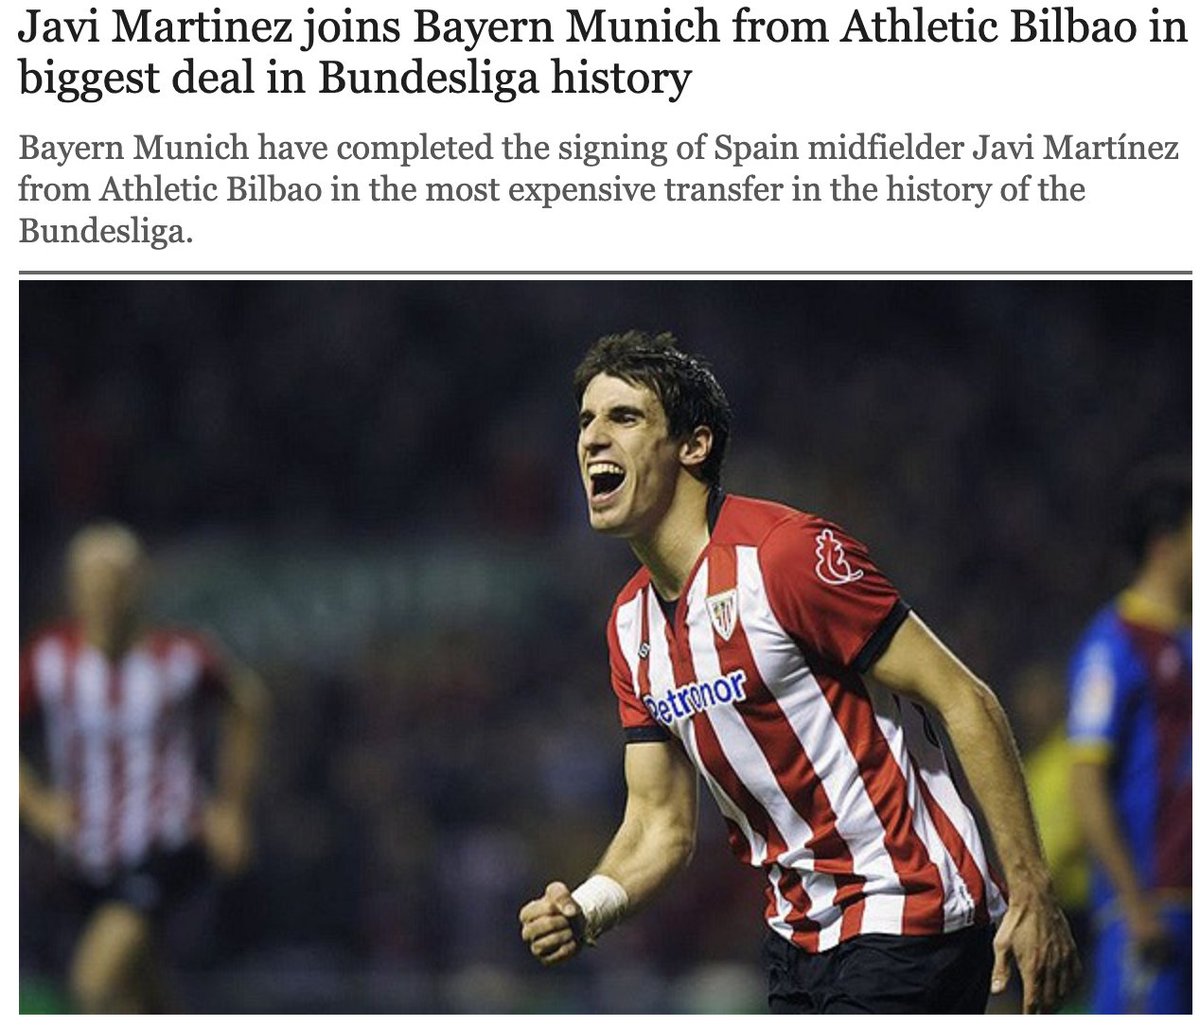 Those same “imposters” were actually three Spanish lawyers, Rodrigo García Lucas, Alvaro Reig Gurrea and Guillermo Gutiérrez, who oversaw Bayern's successful move for Javi Martínez. That deal was completed by paying Bilbao the buyout clause and had taken a month to organise.